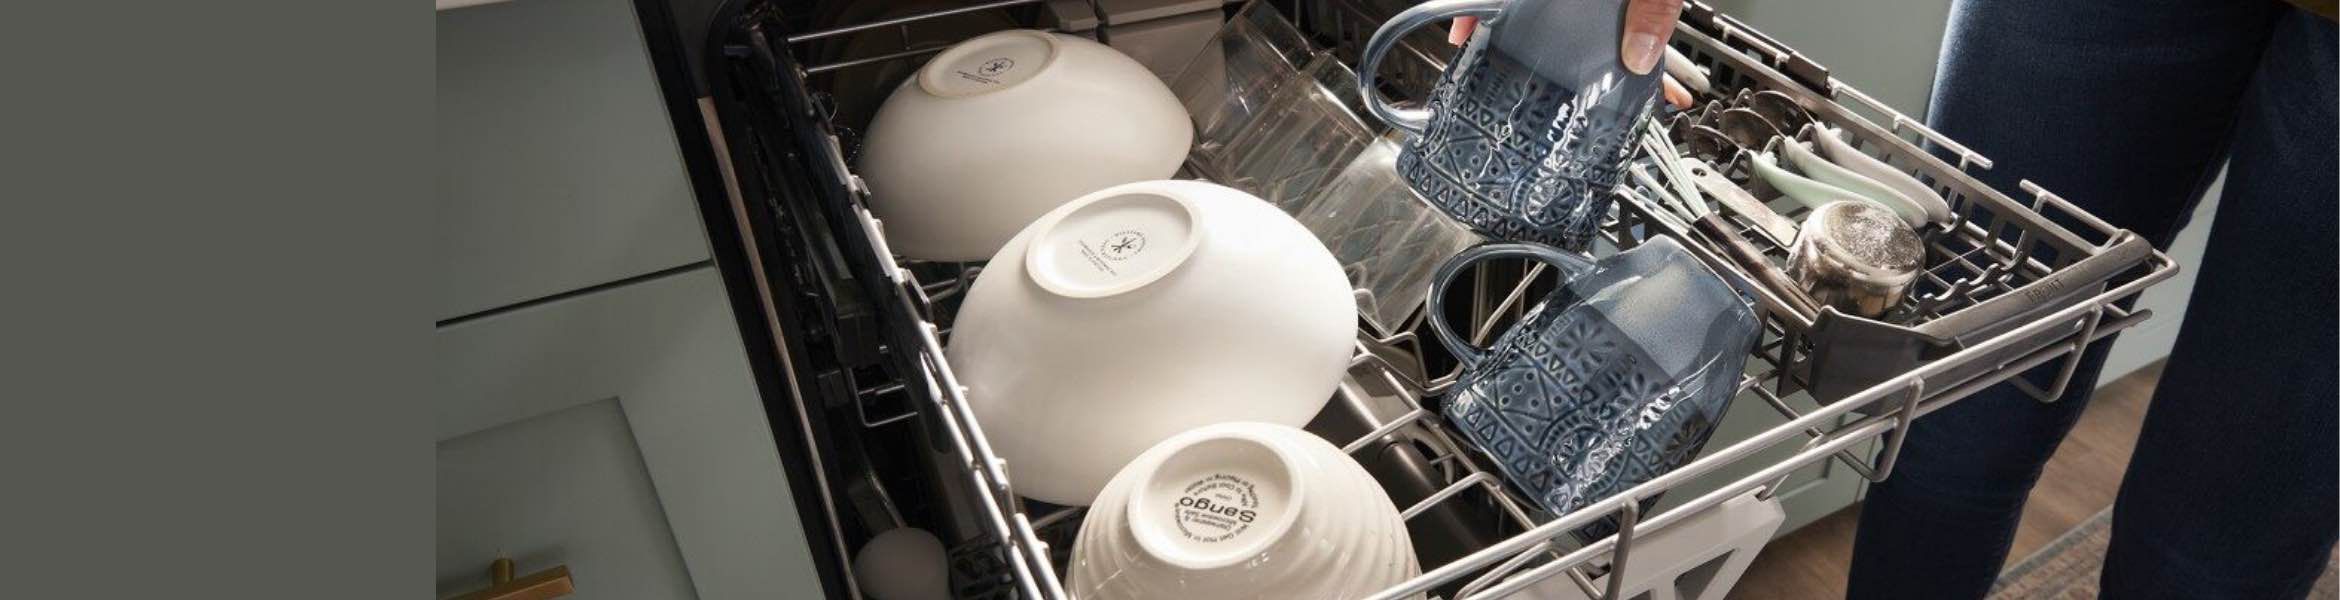 The top rack of a dishwasher pulled out. On the rack is a row of white bowls, a row of glasses. where a hand is removing a glass, and cutlery in a cutlery tray.